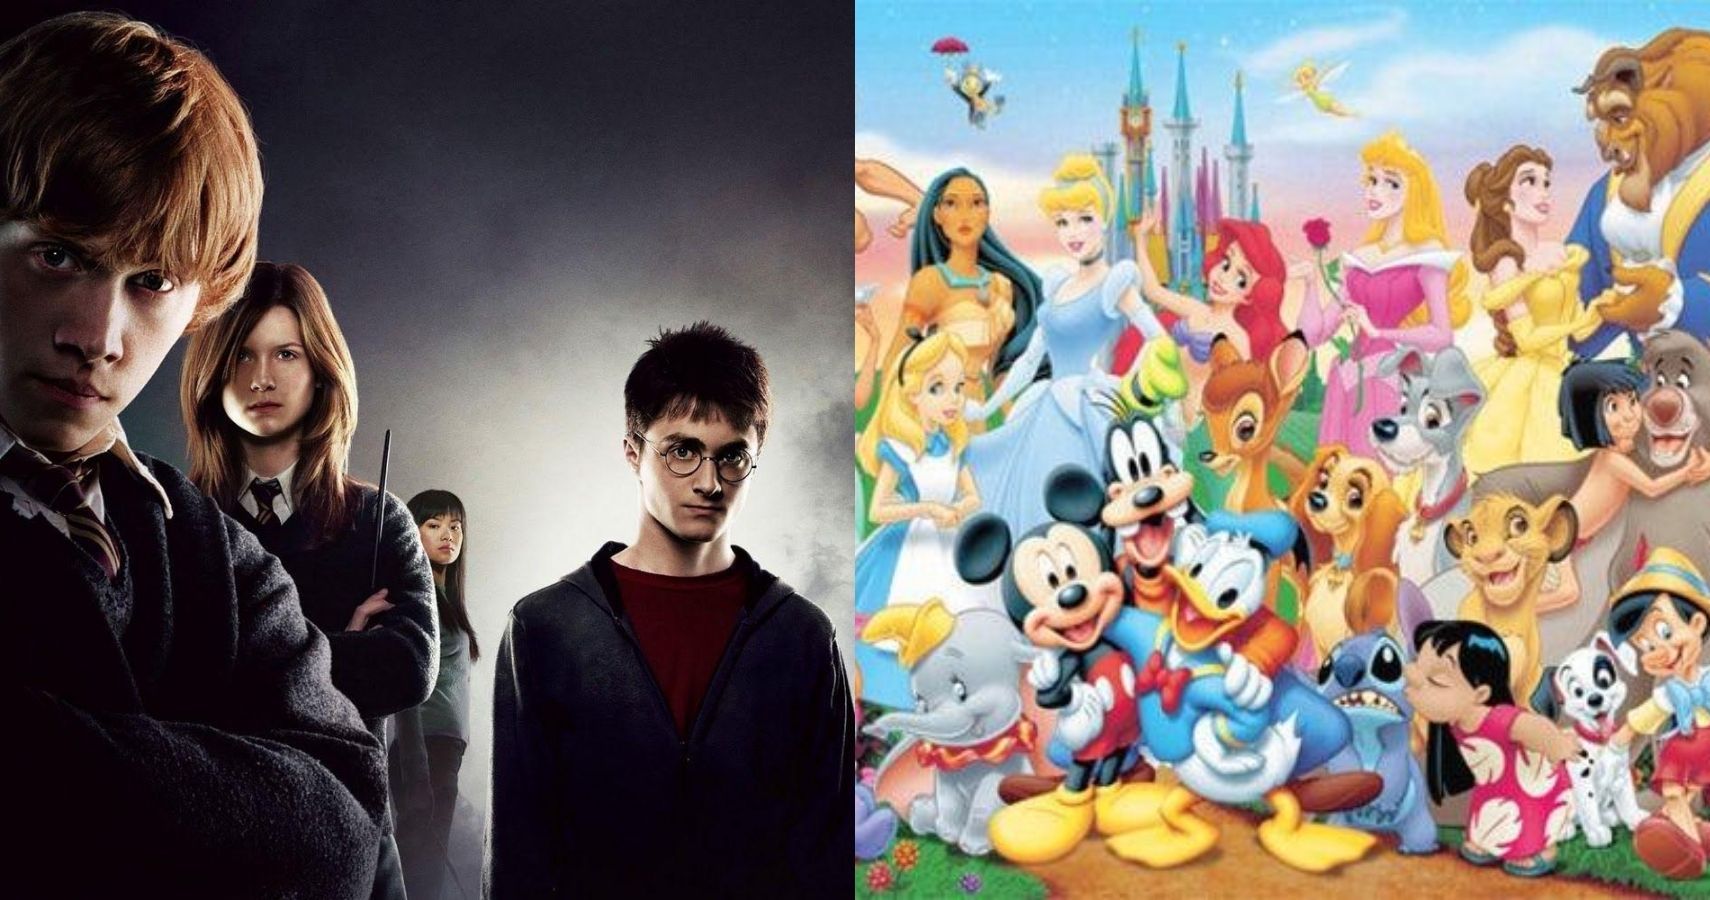 Harry Potter Characters & Their Disney Counterparts